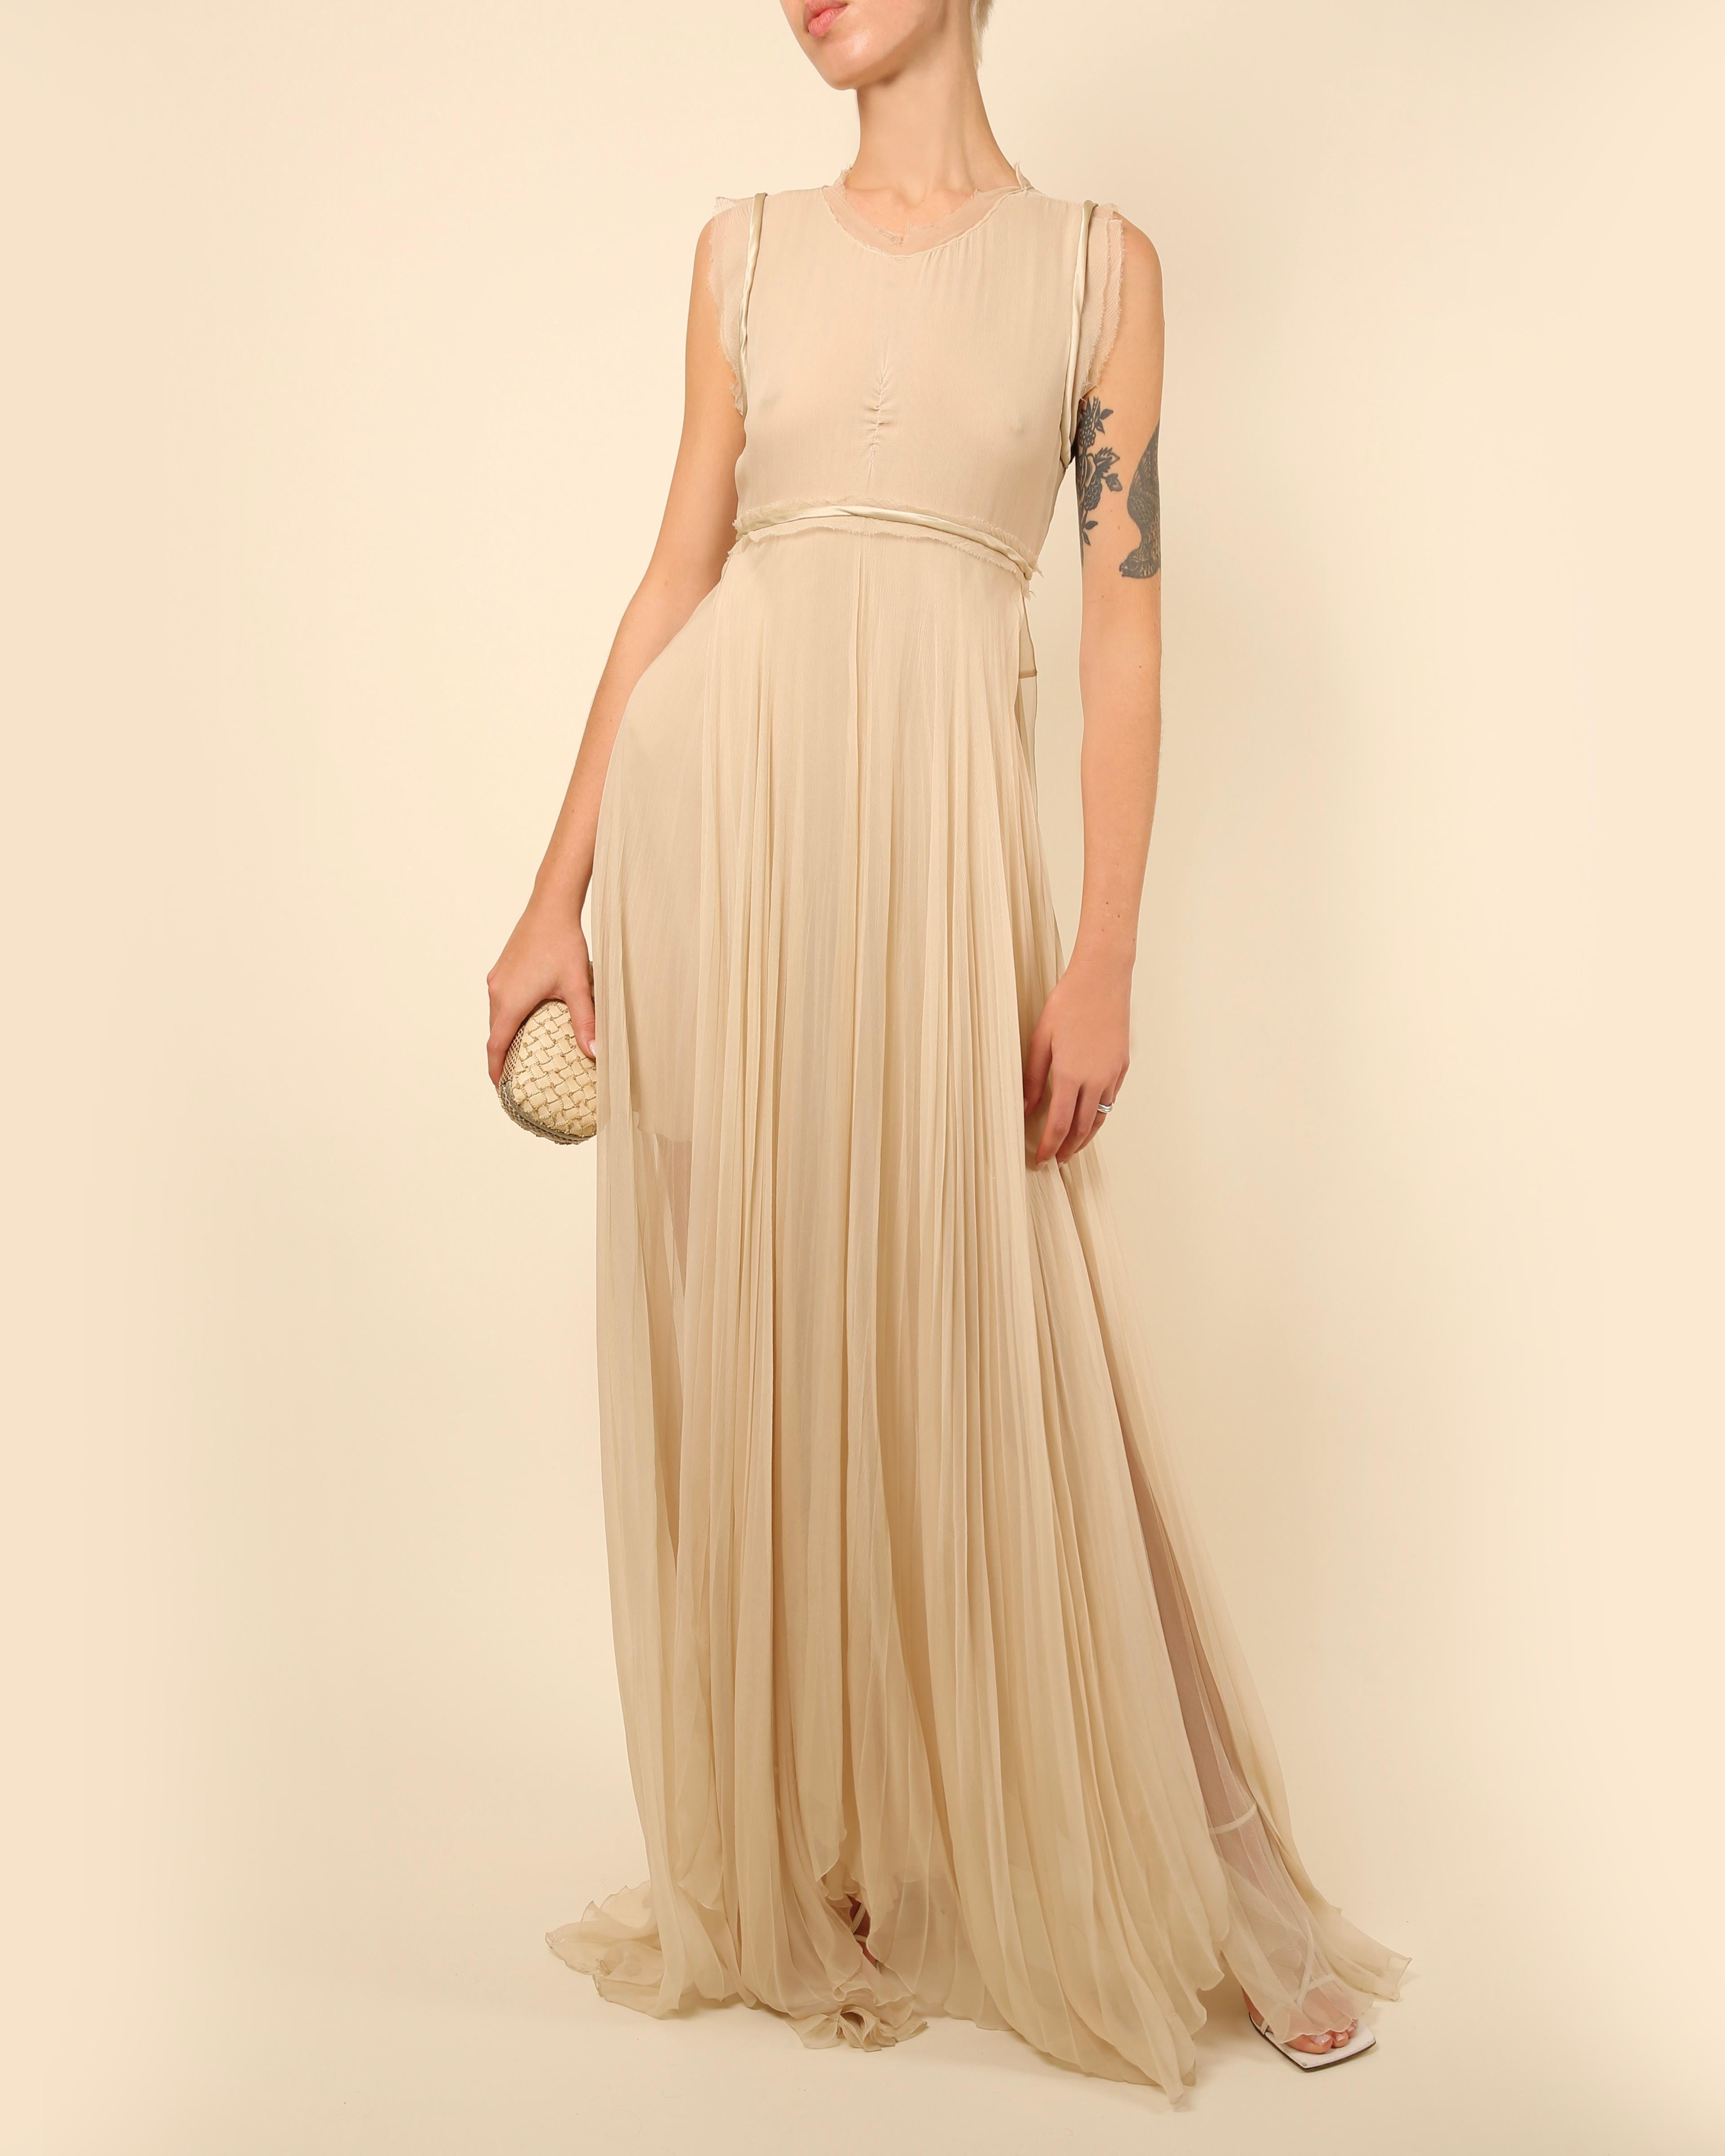 Chloe S/S10 ivory white beige chiffon silk layered sleeveless wedding dress gown In Good Condition For Sale In Paris, FR